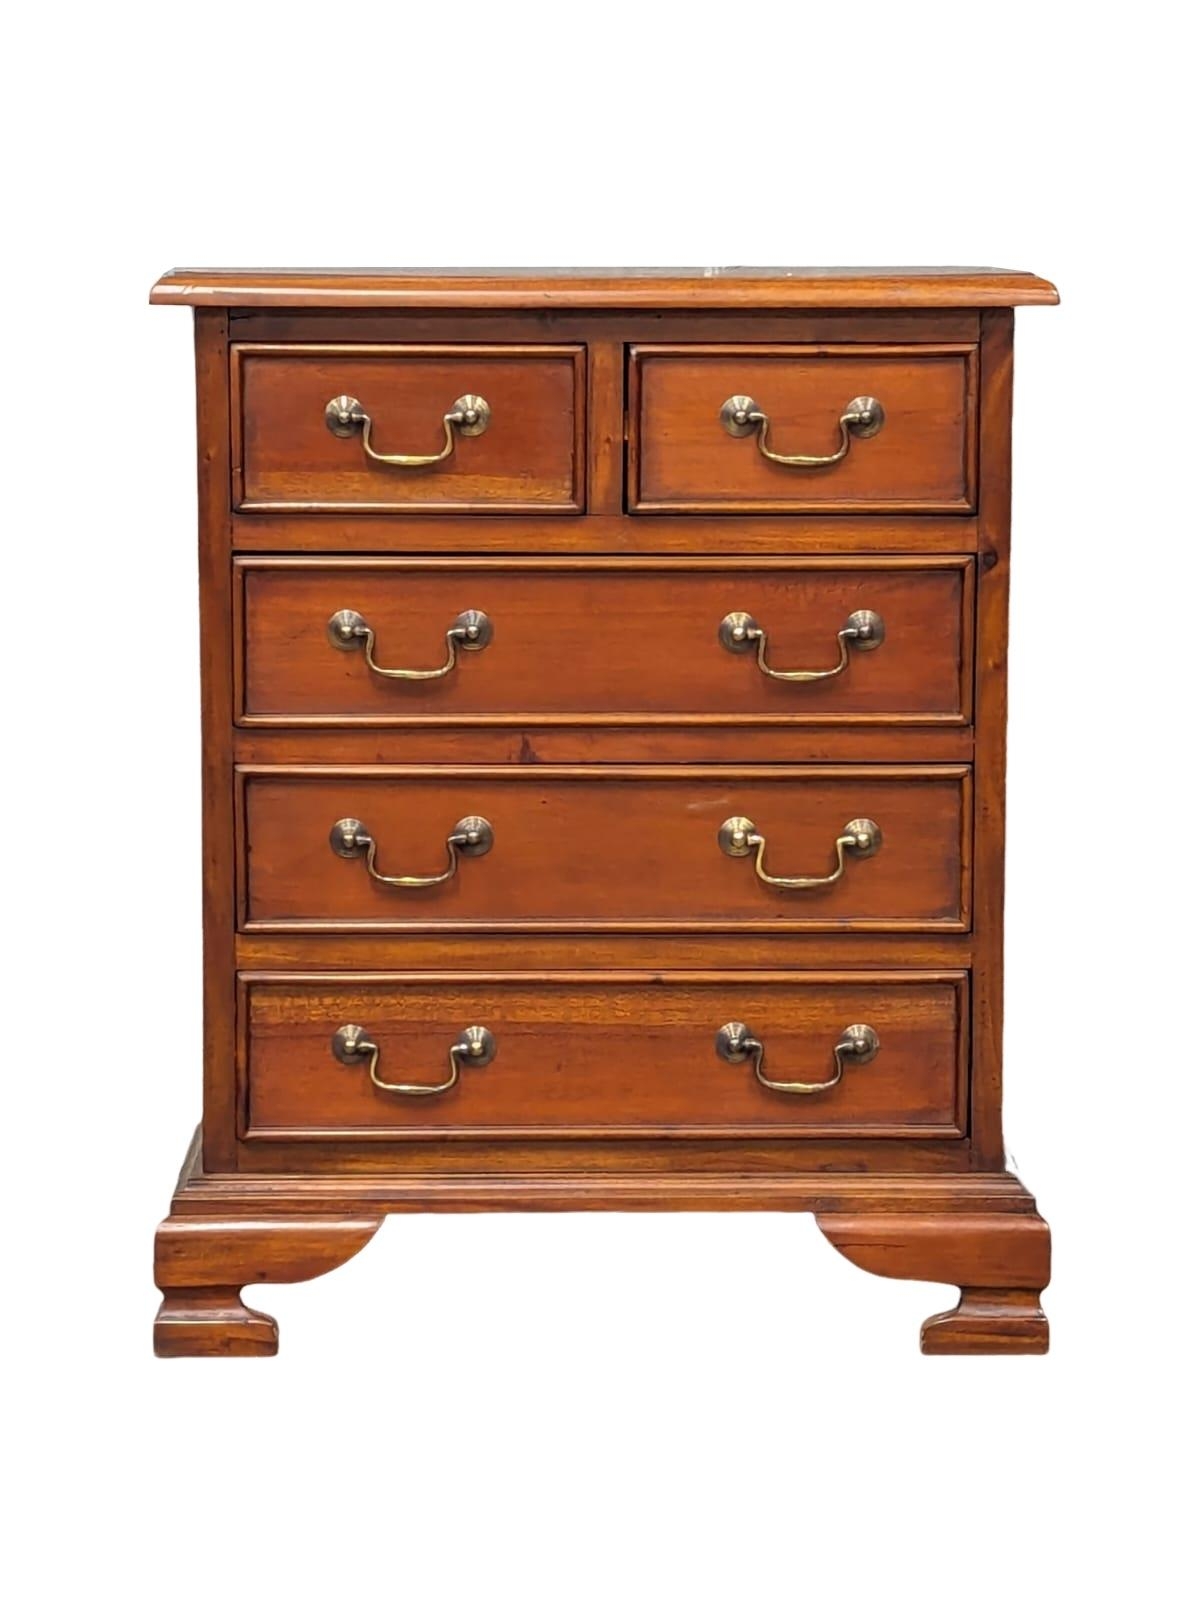 A small Georgian style mahogany chest of drawers. 55.5x33x67.5cm